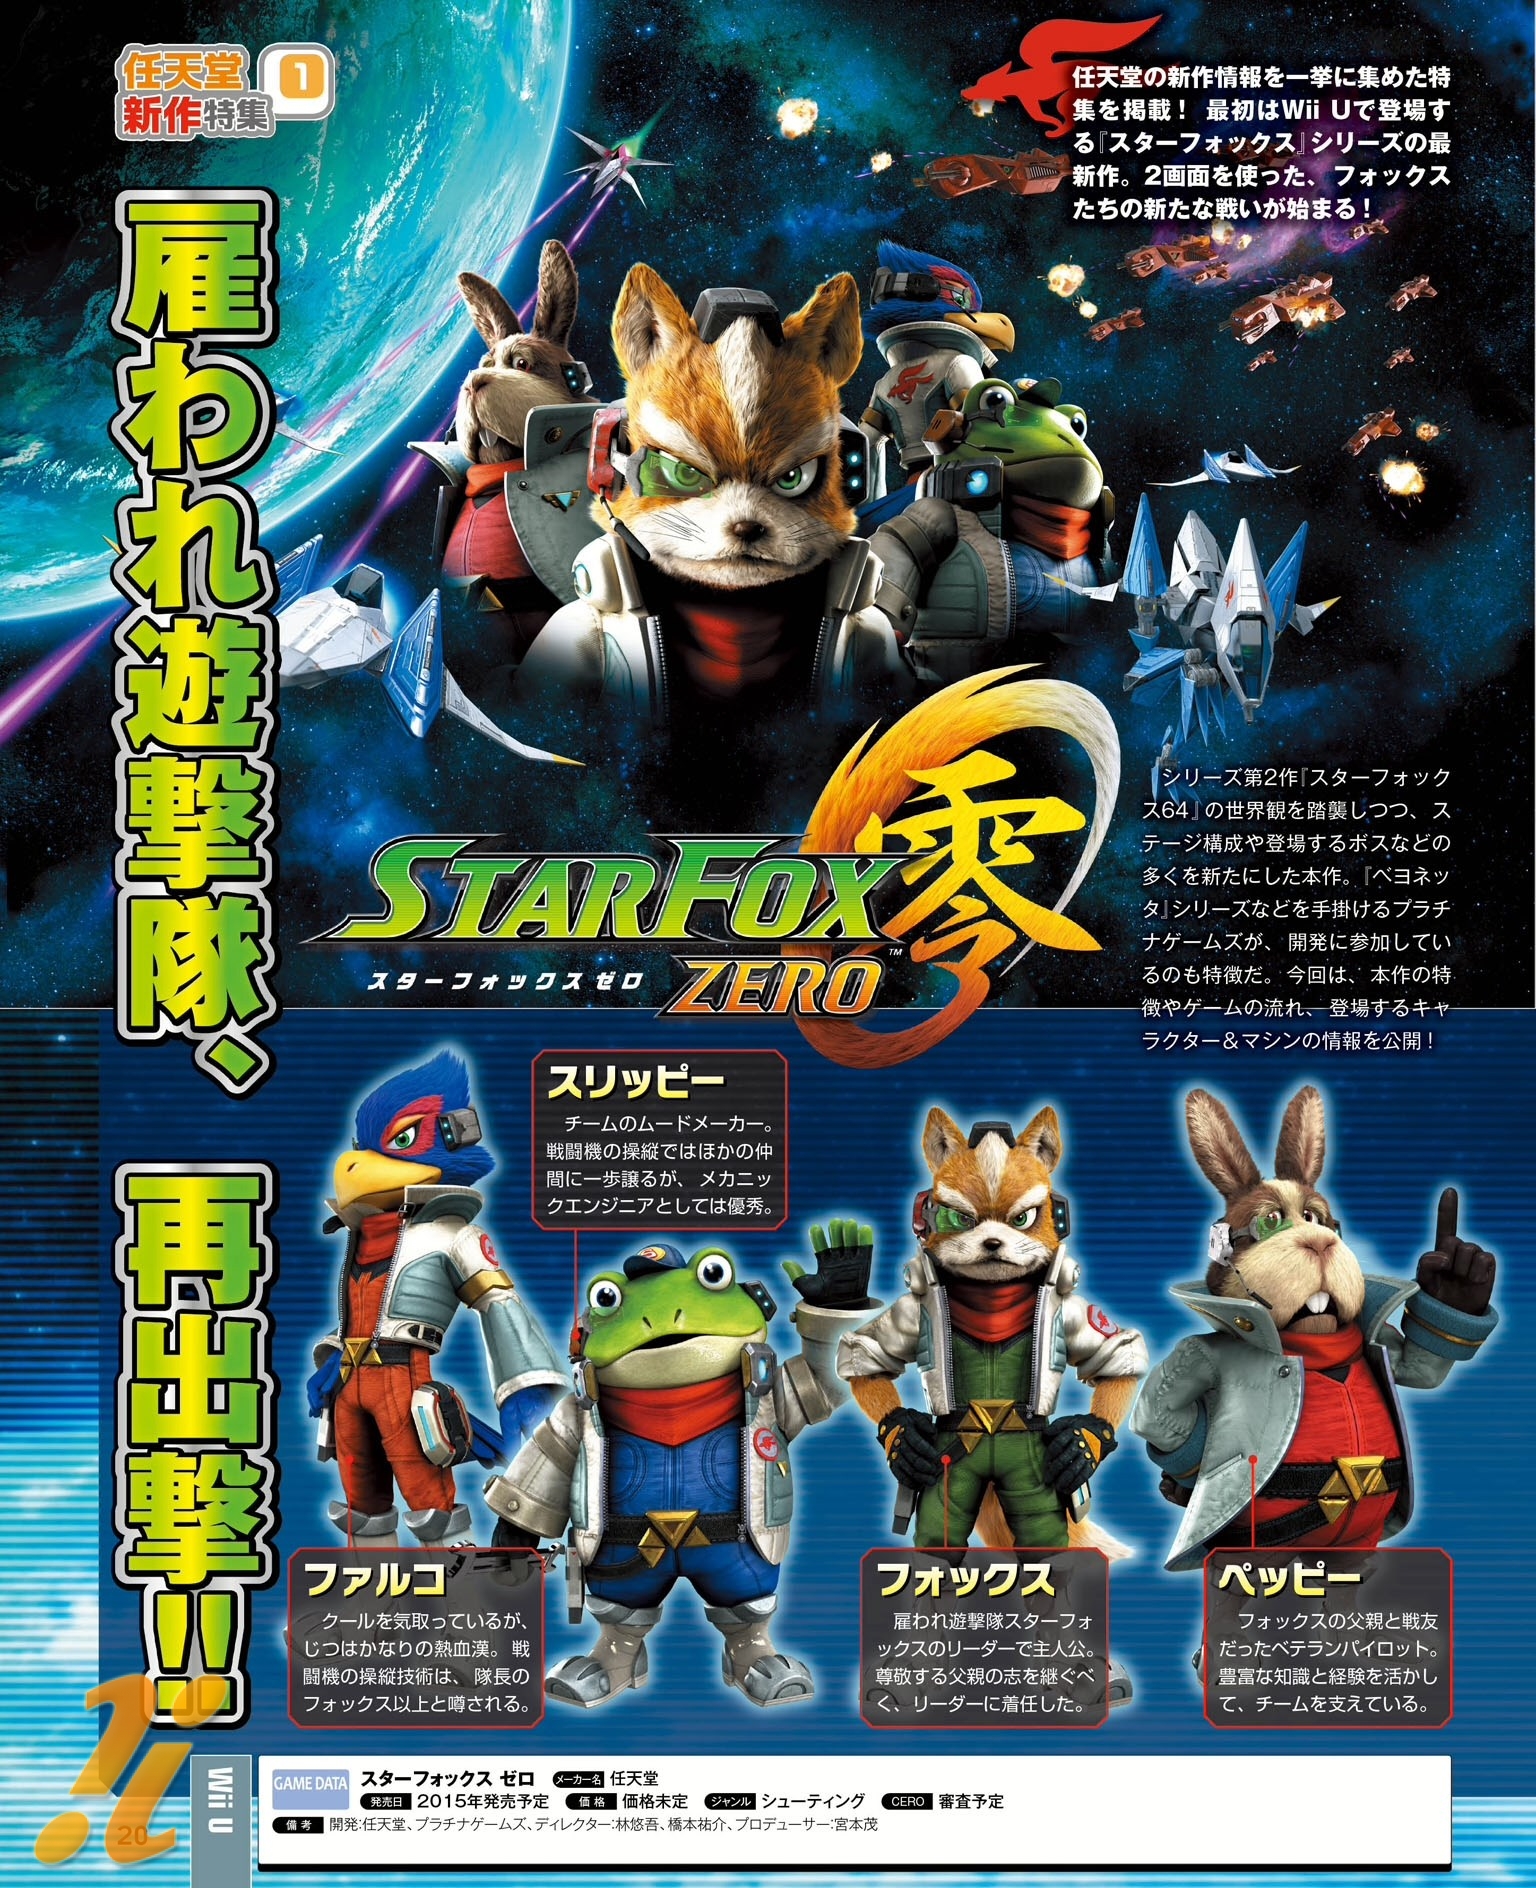 These Are Some New Image Of The Nintendo Wiiu Game Star Fox Zero